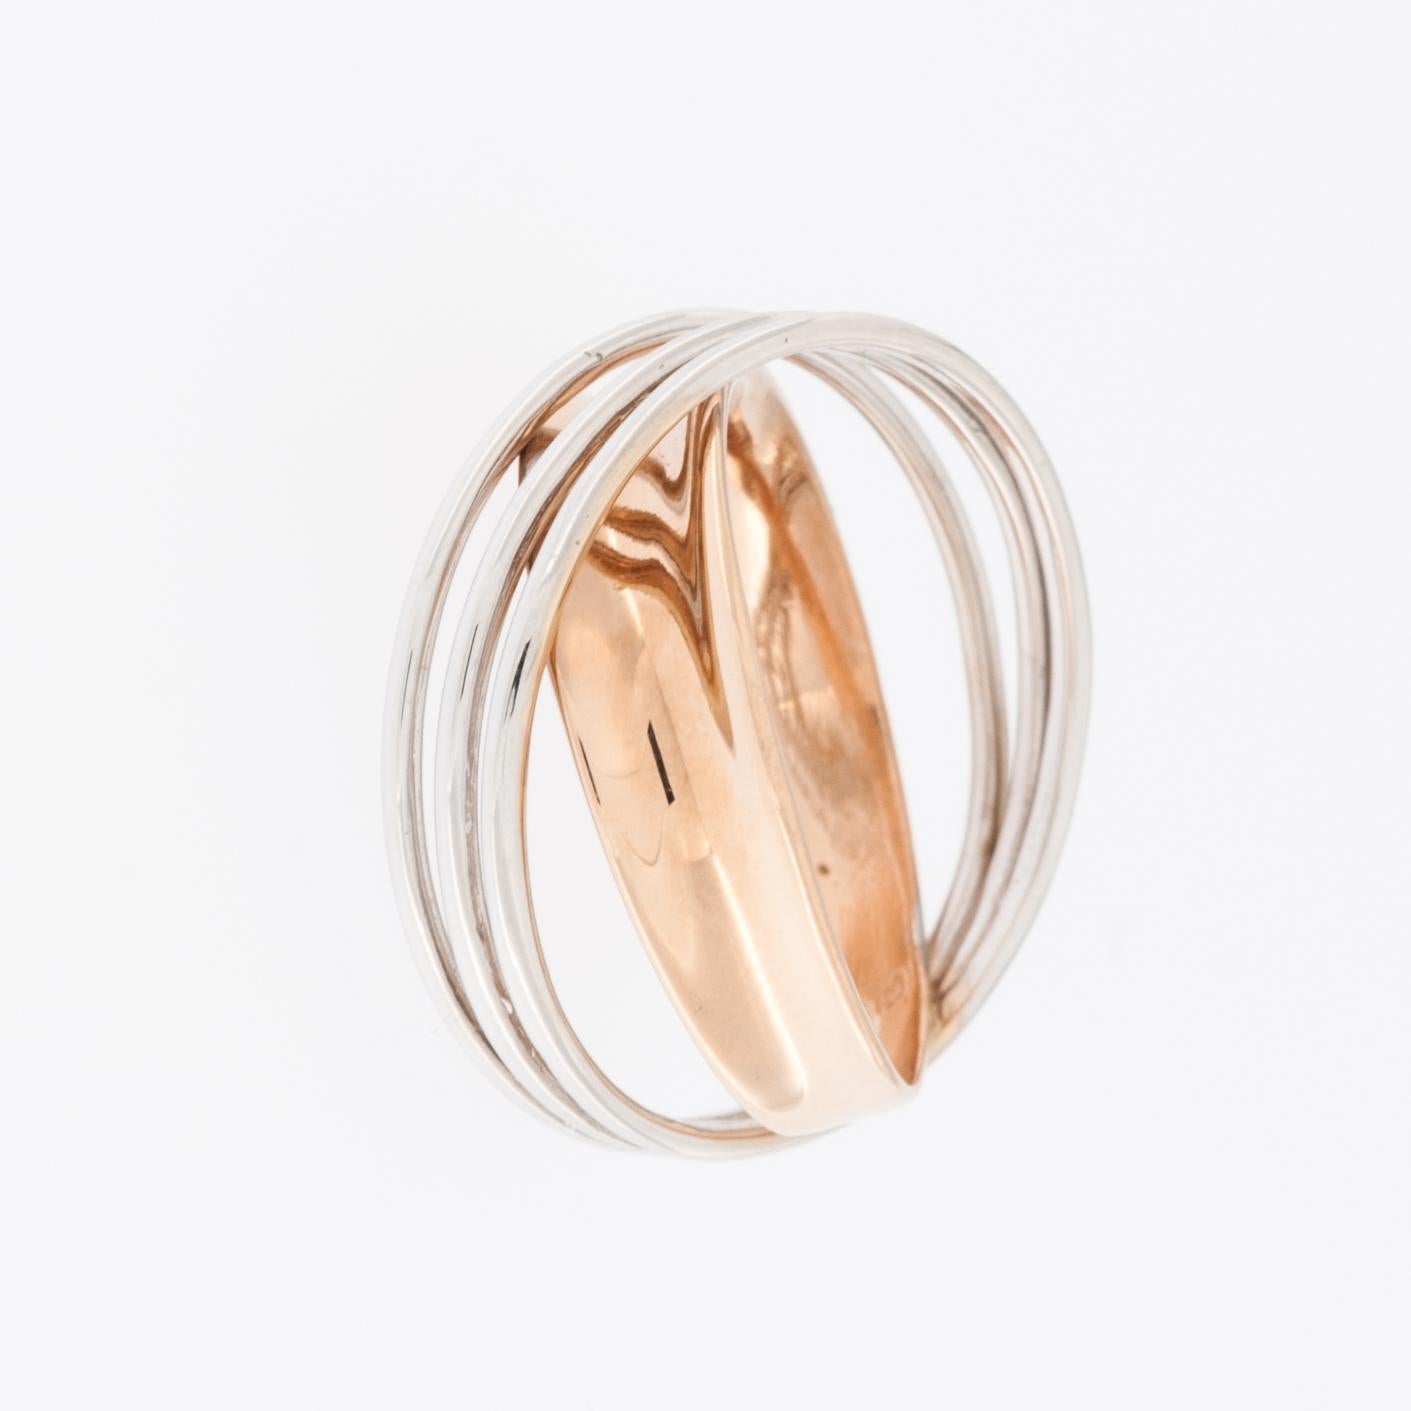 Italian Modern 18kt White and Rose Gold Ring In Good Condition For Sale In Esch sur Alzette, Esch-sur-Alzette